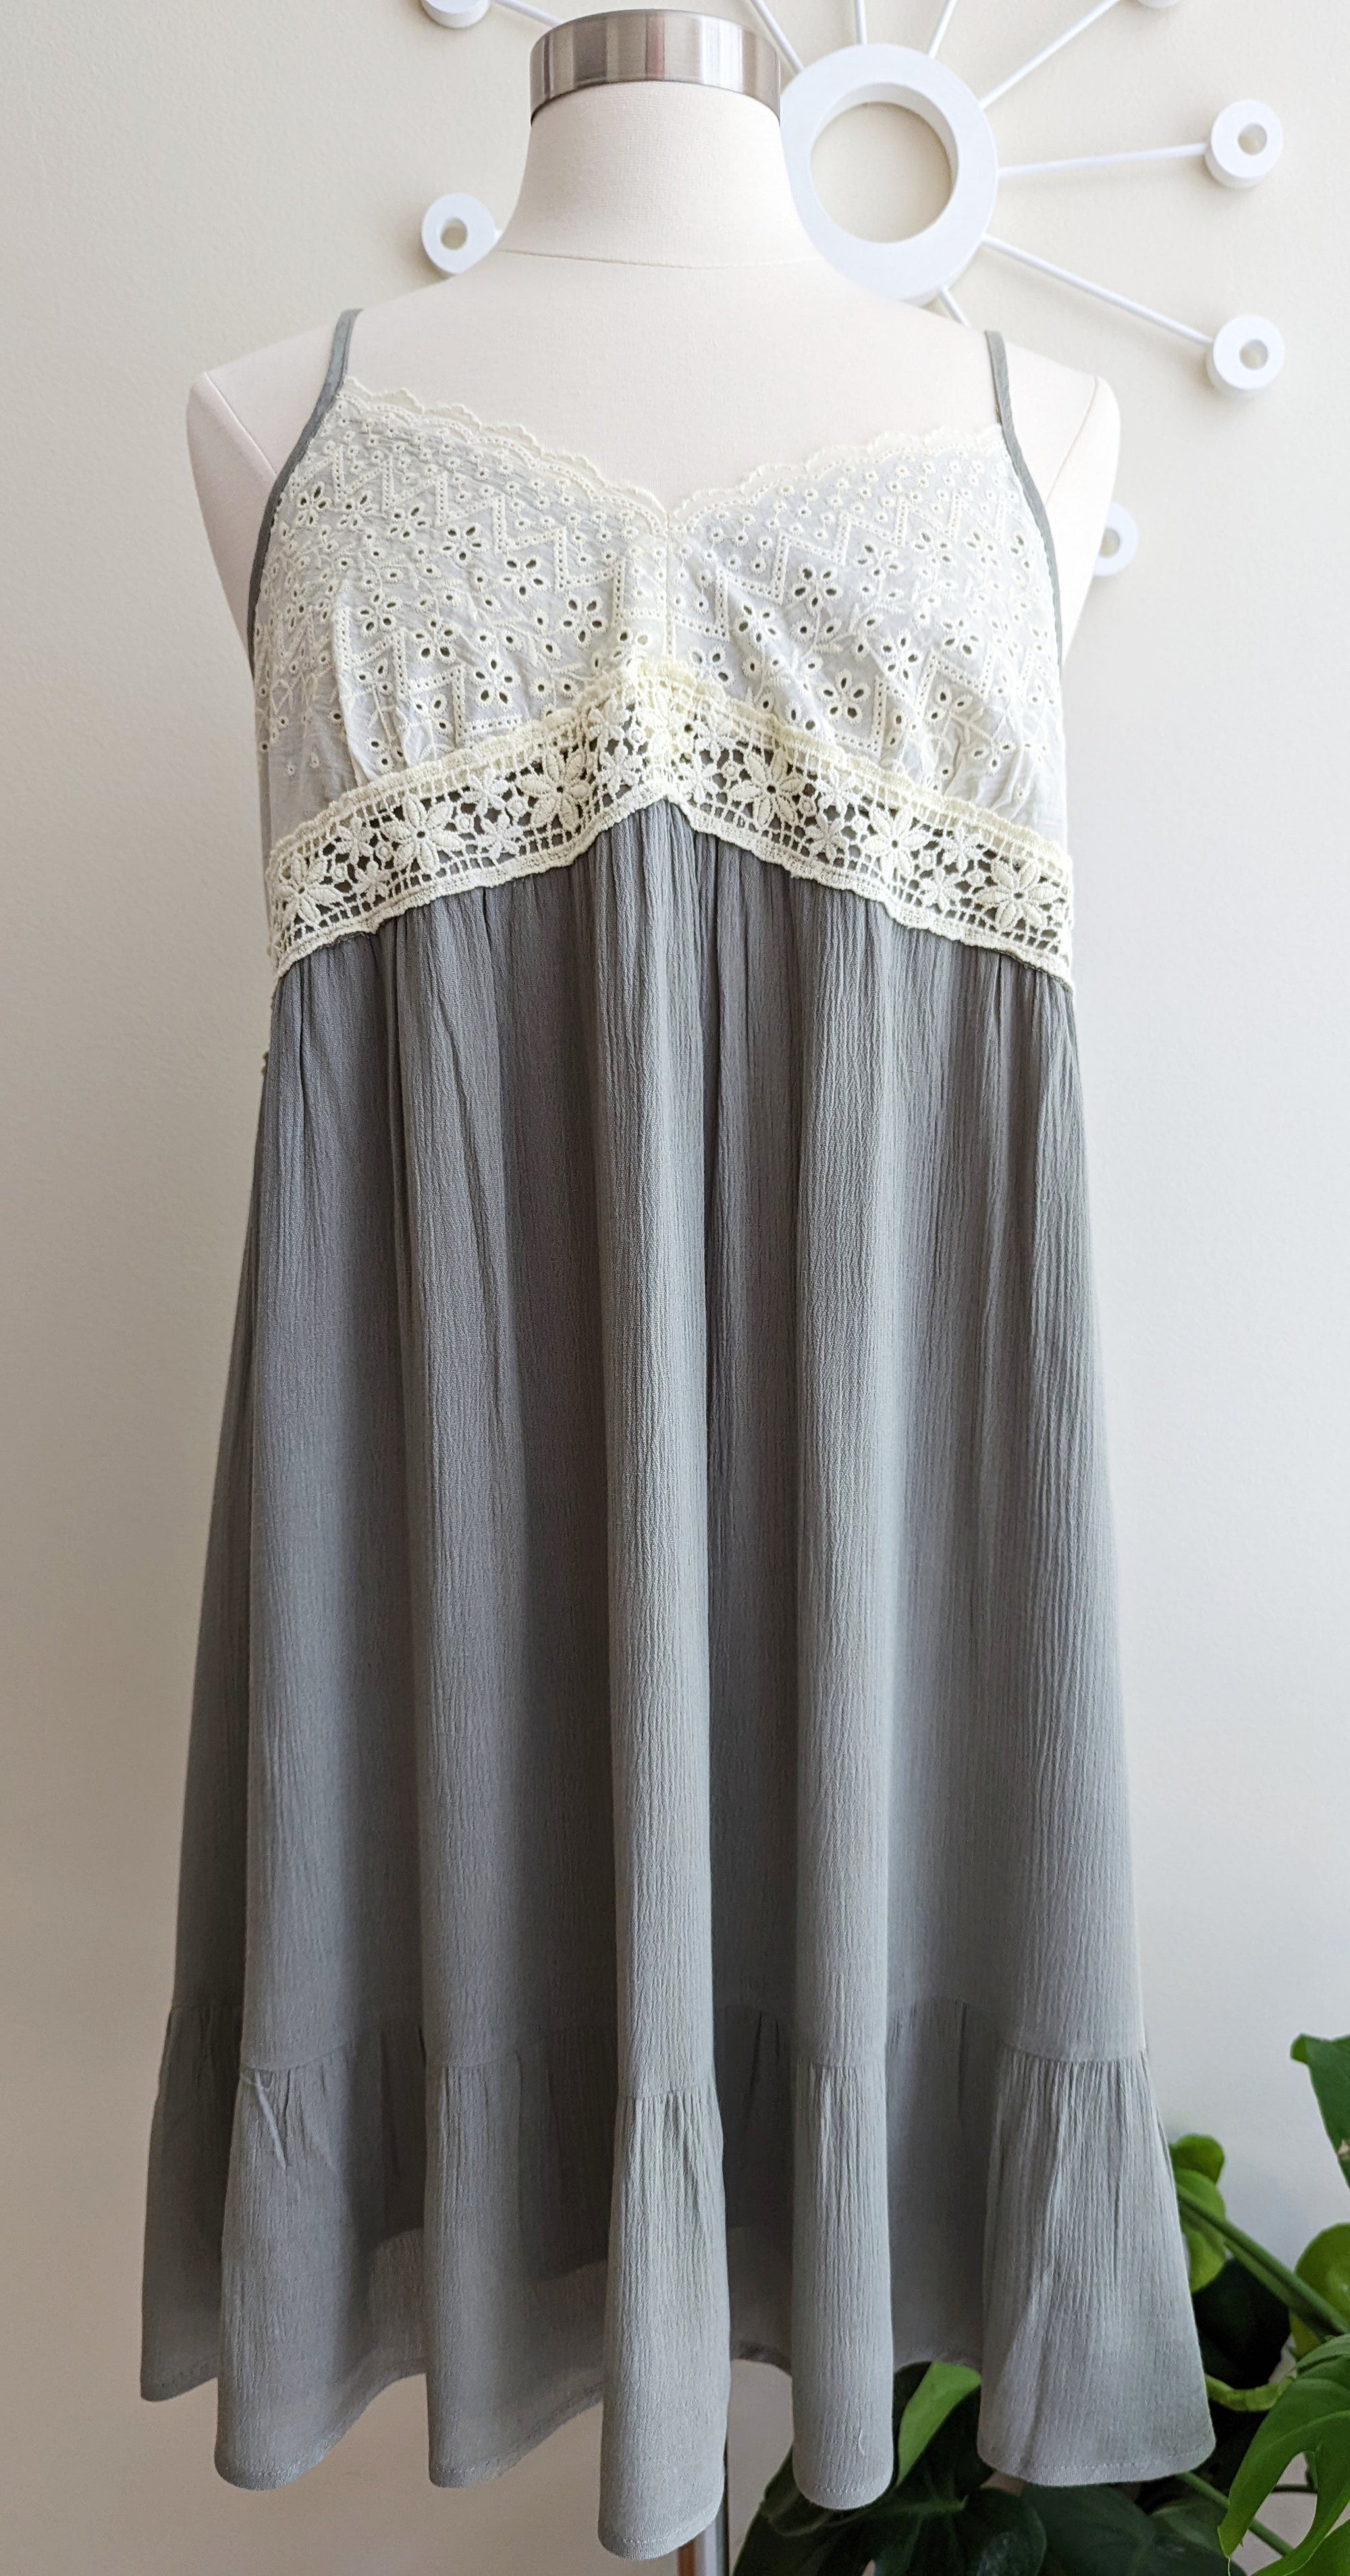 Olive Bohemian Sundress with Lace